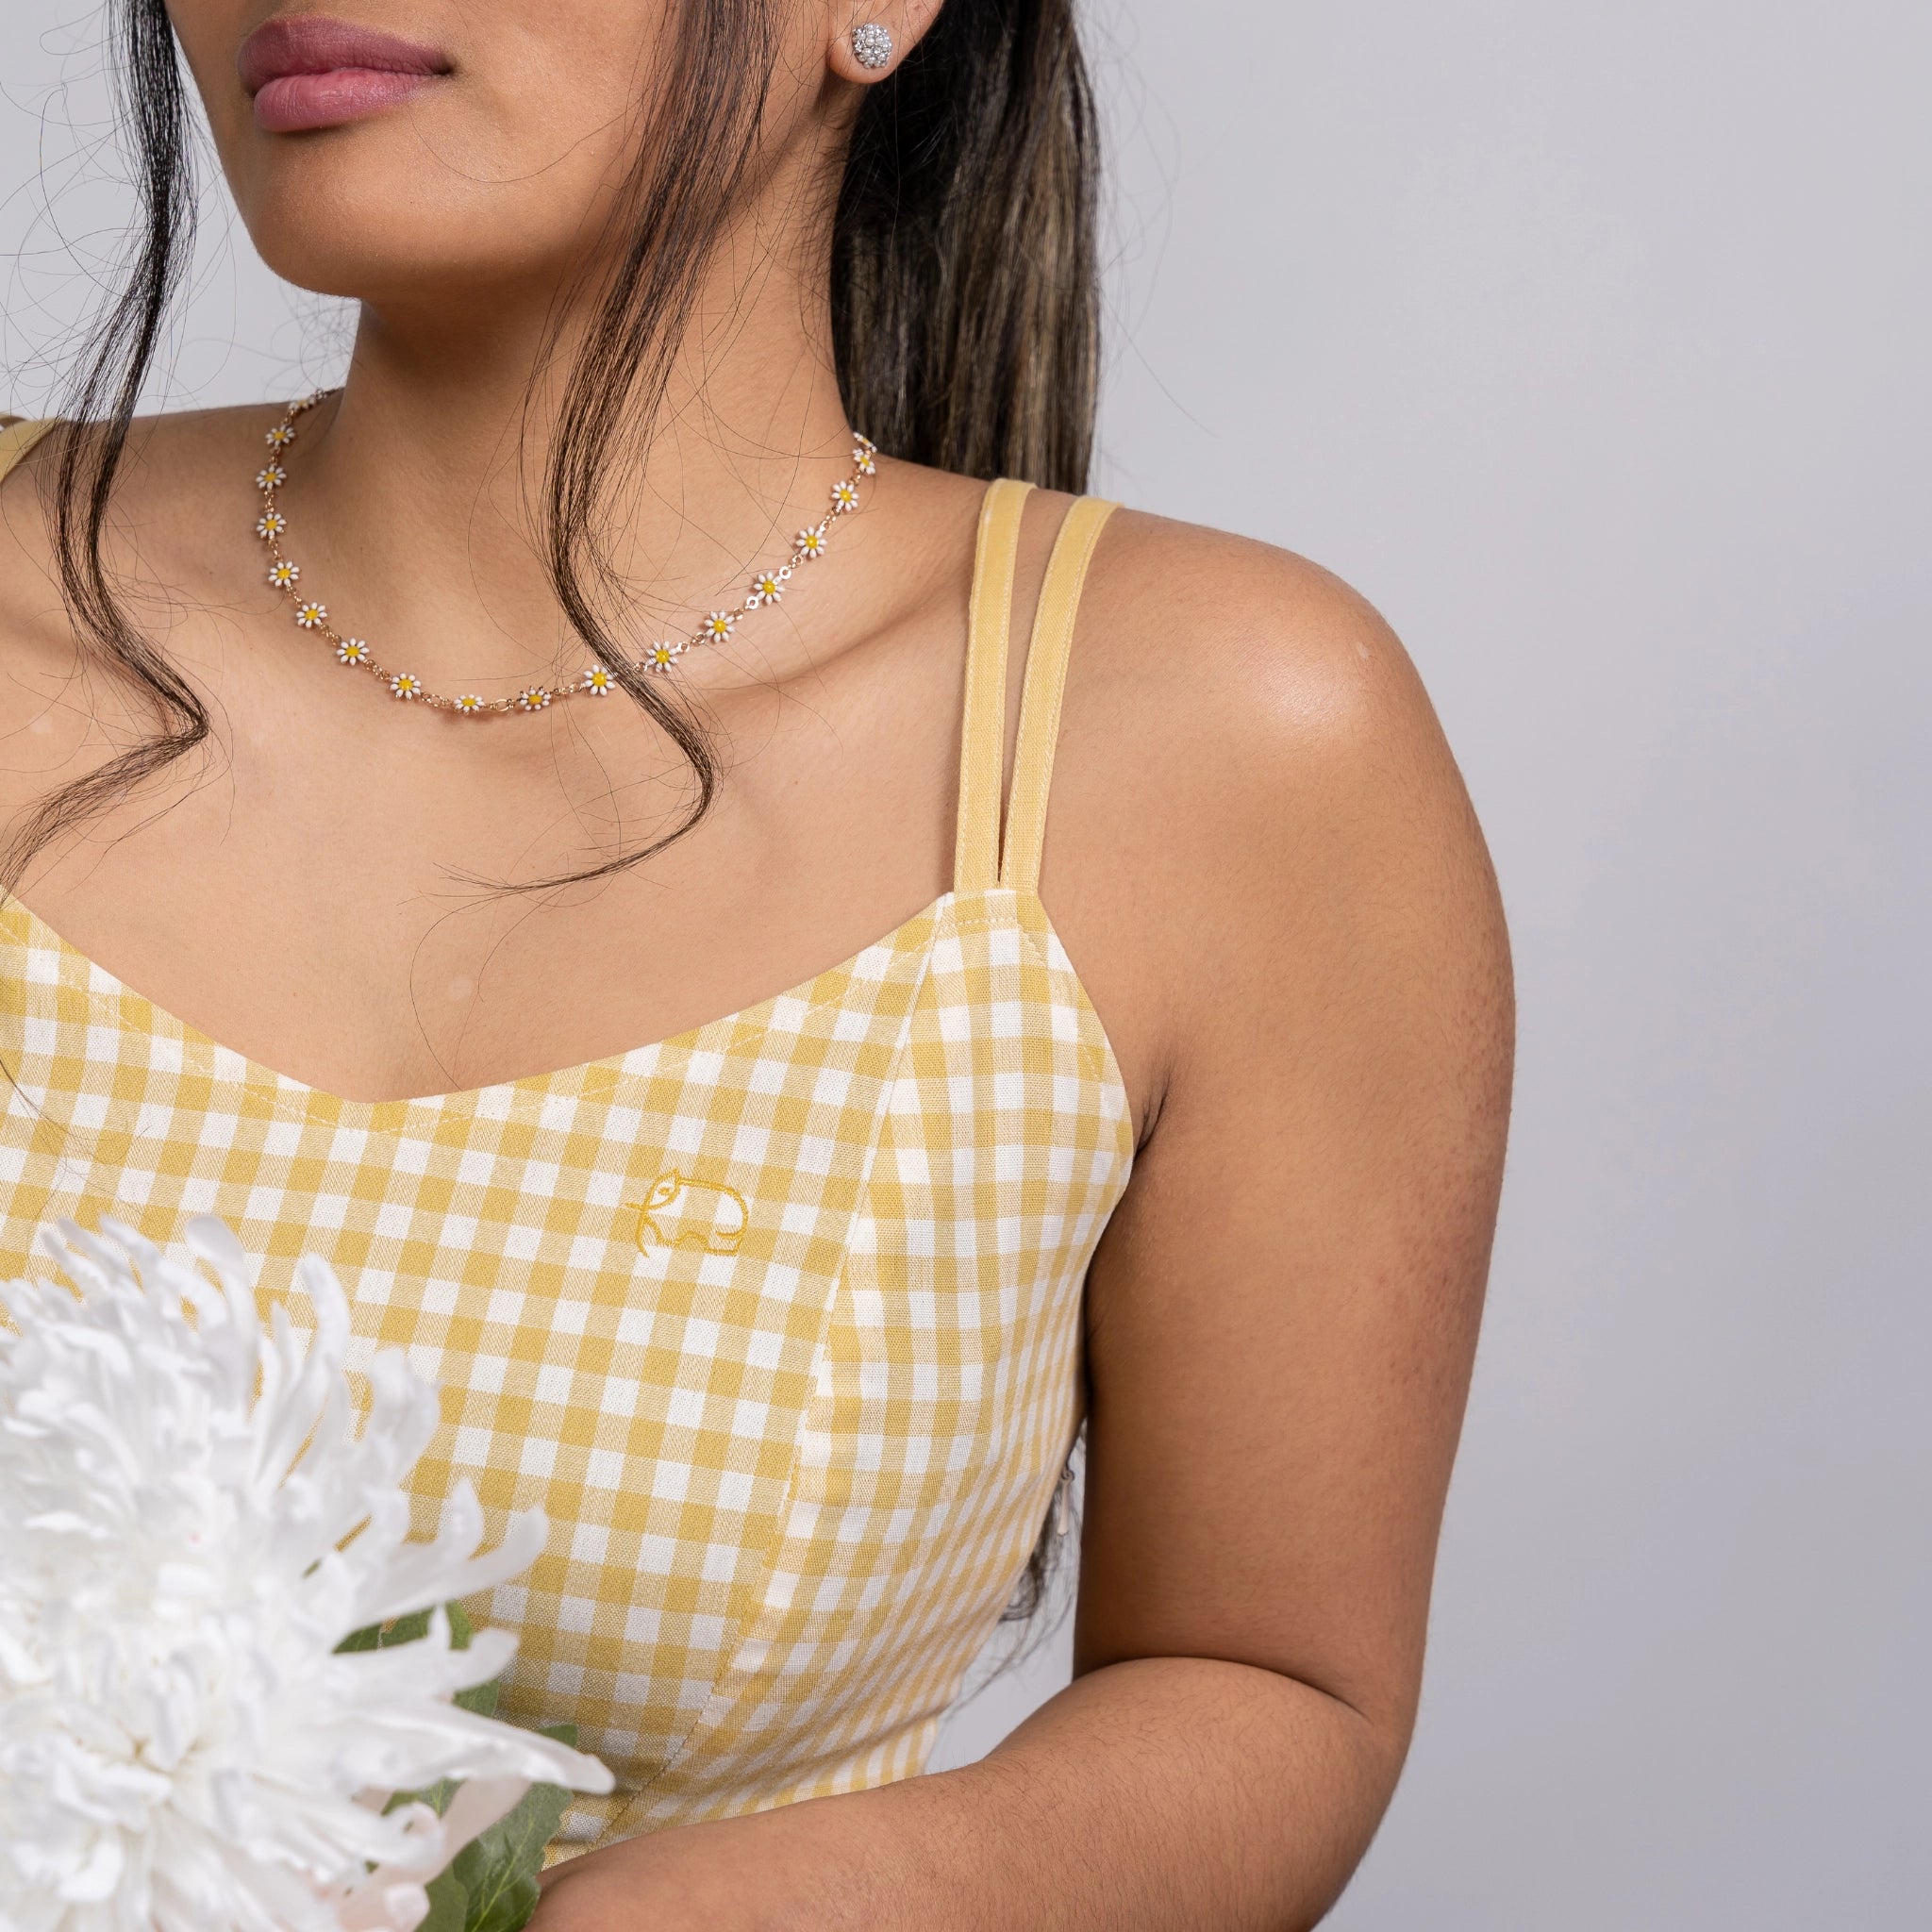 Woman wearing a Sunshine Chic Yellow Plaid Cotton Mini Dress by Karee and a floral necklace, holding a large white flower, cropped at shoulders.